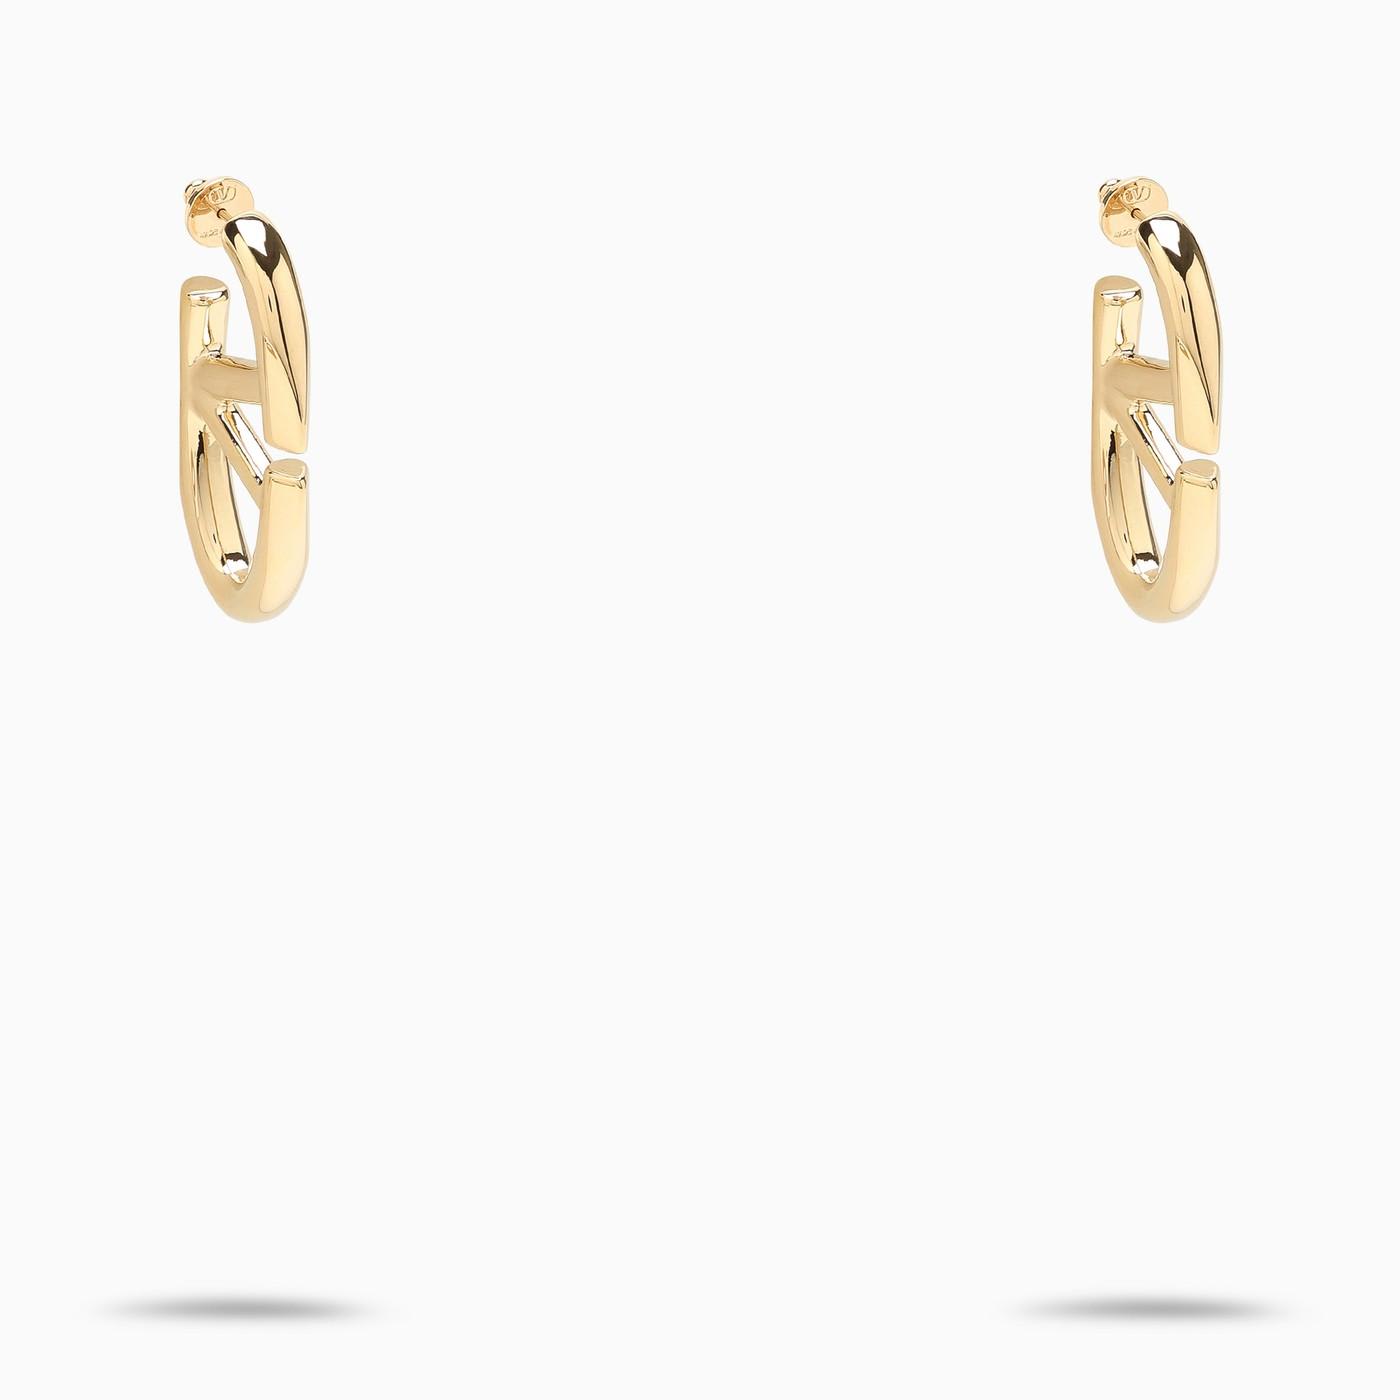 Shop Valentino Golden Oval Vlogo The Bold Edition Earrings